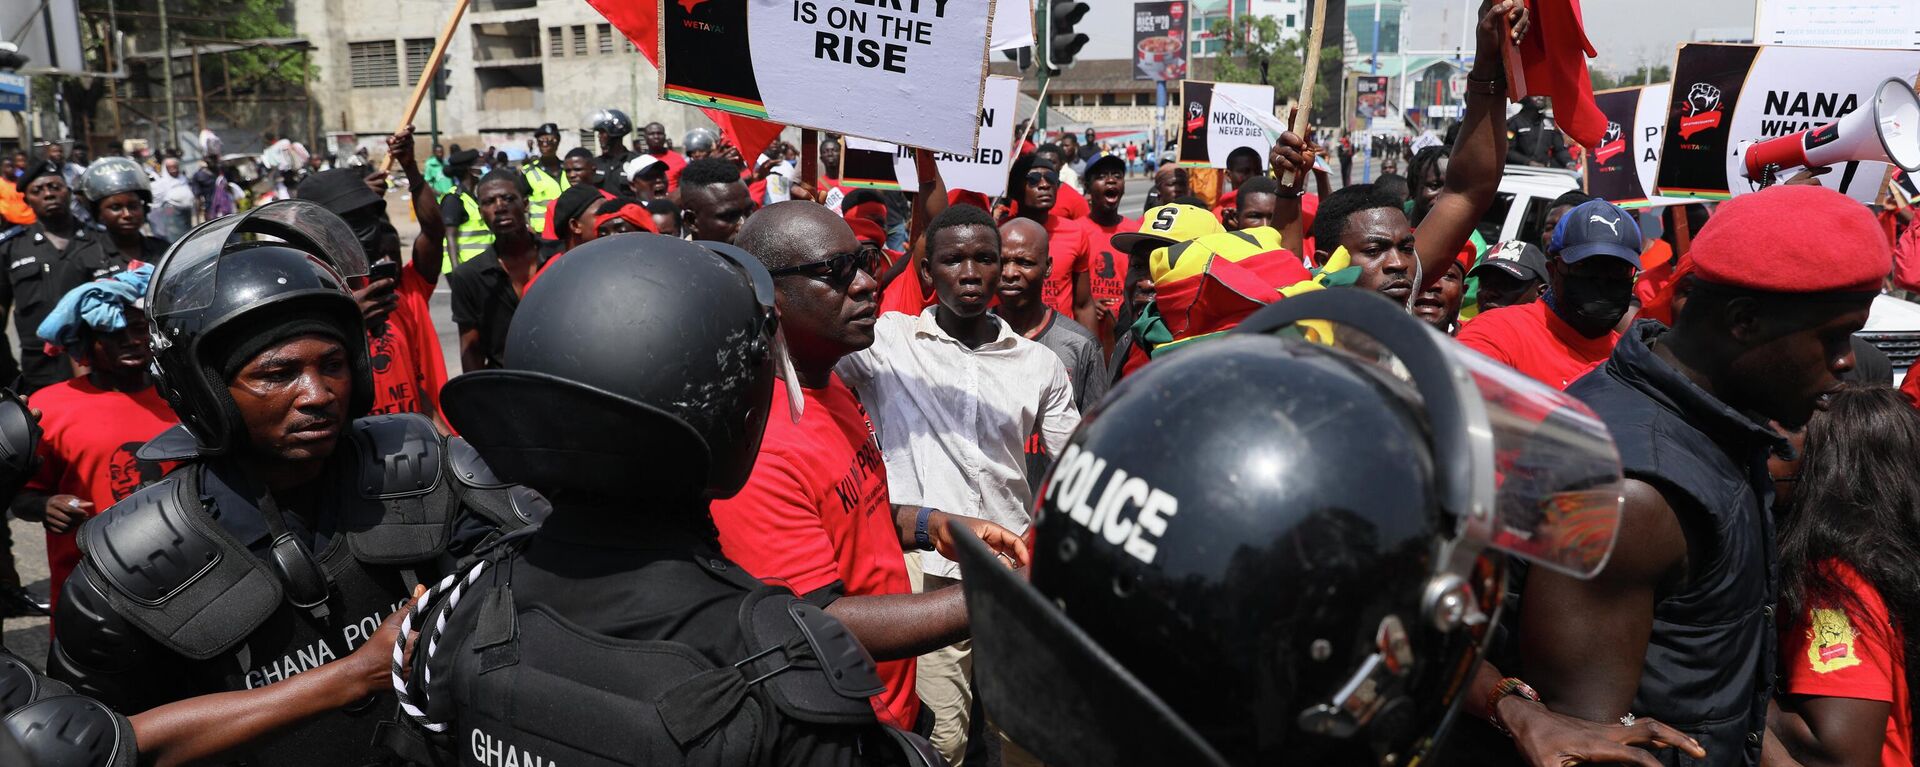 Police officers stand guard as protesters march during a demonstration on the current Cedi currency depreciation in the history of the country, a hike in fuel prices, and the general economic hardship, and asking Ghana President Nana Akufo-Addo and his deputy Mahamudu Bawumia to resign, in Accra, Ghana, on November 5, 2022.  - Sputnik International, 1920, 06.11.2022